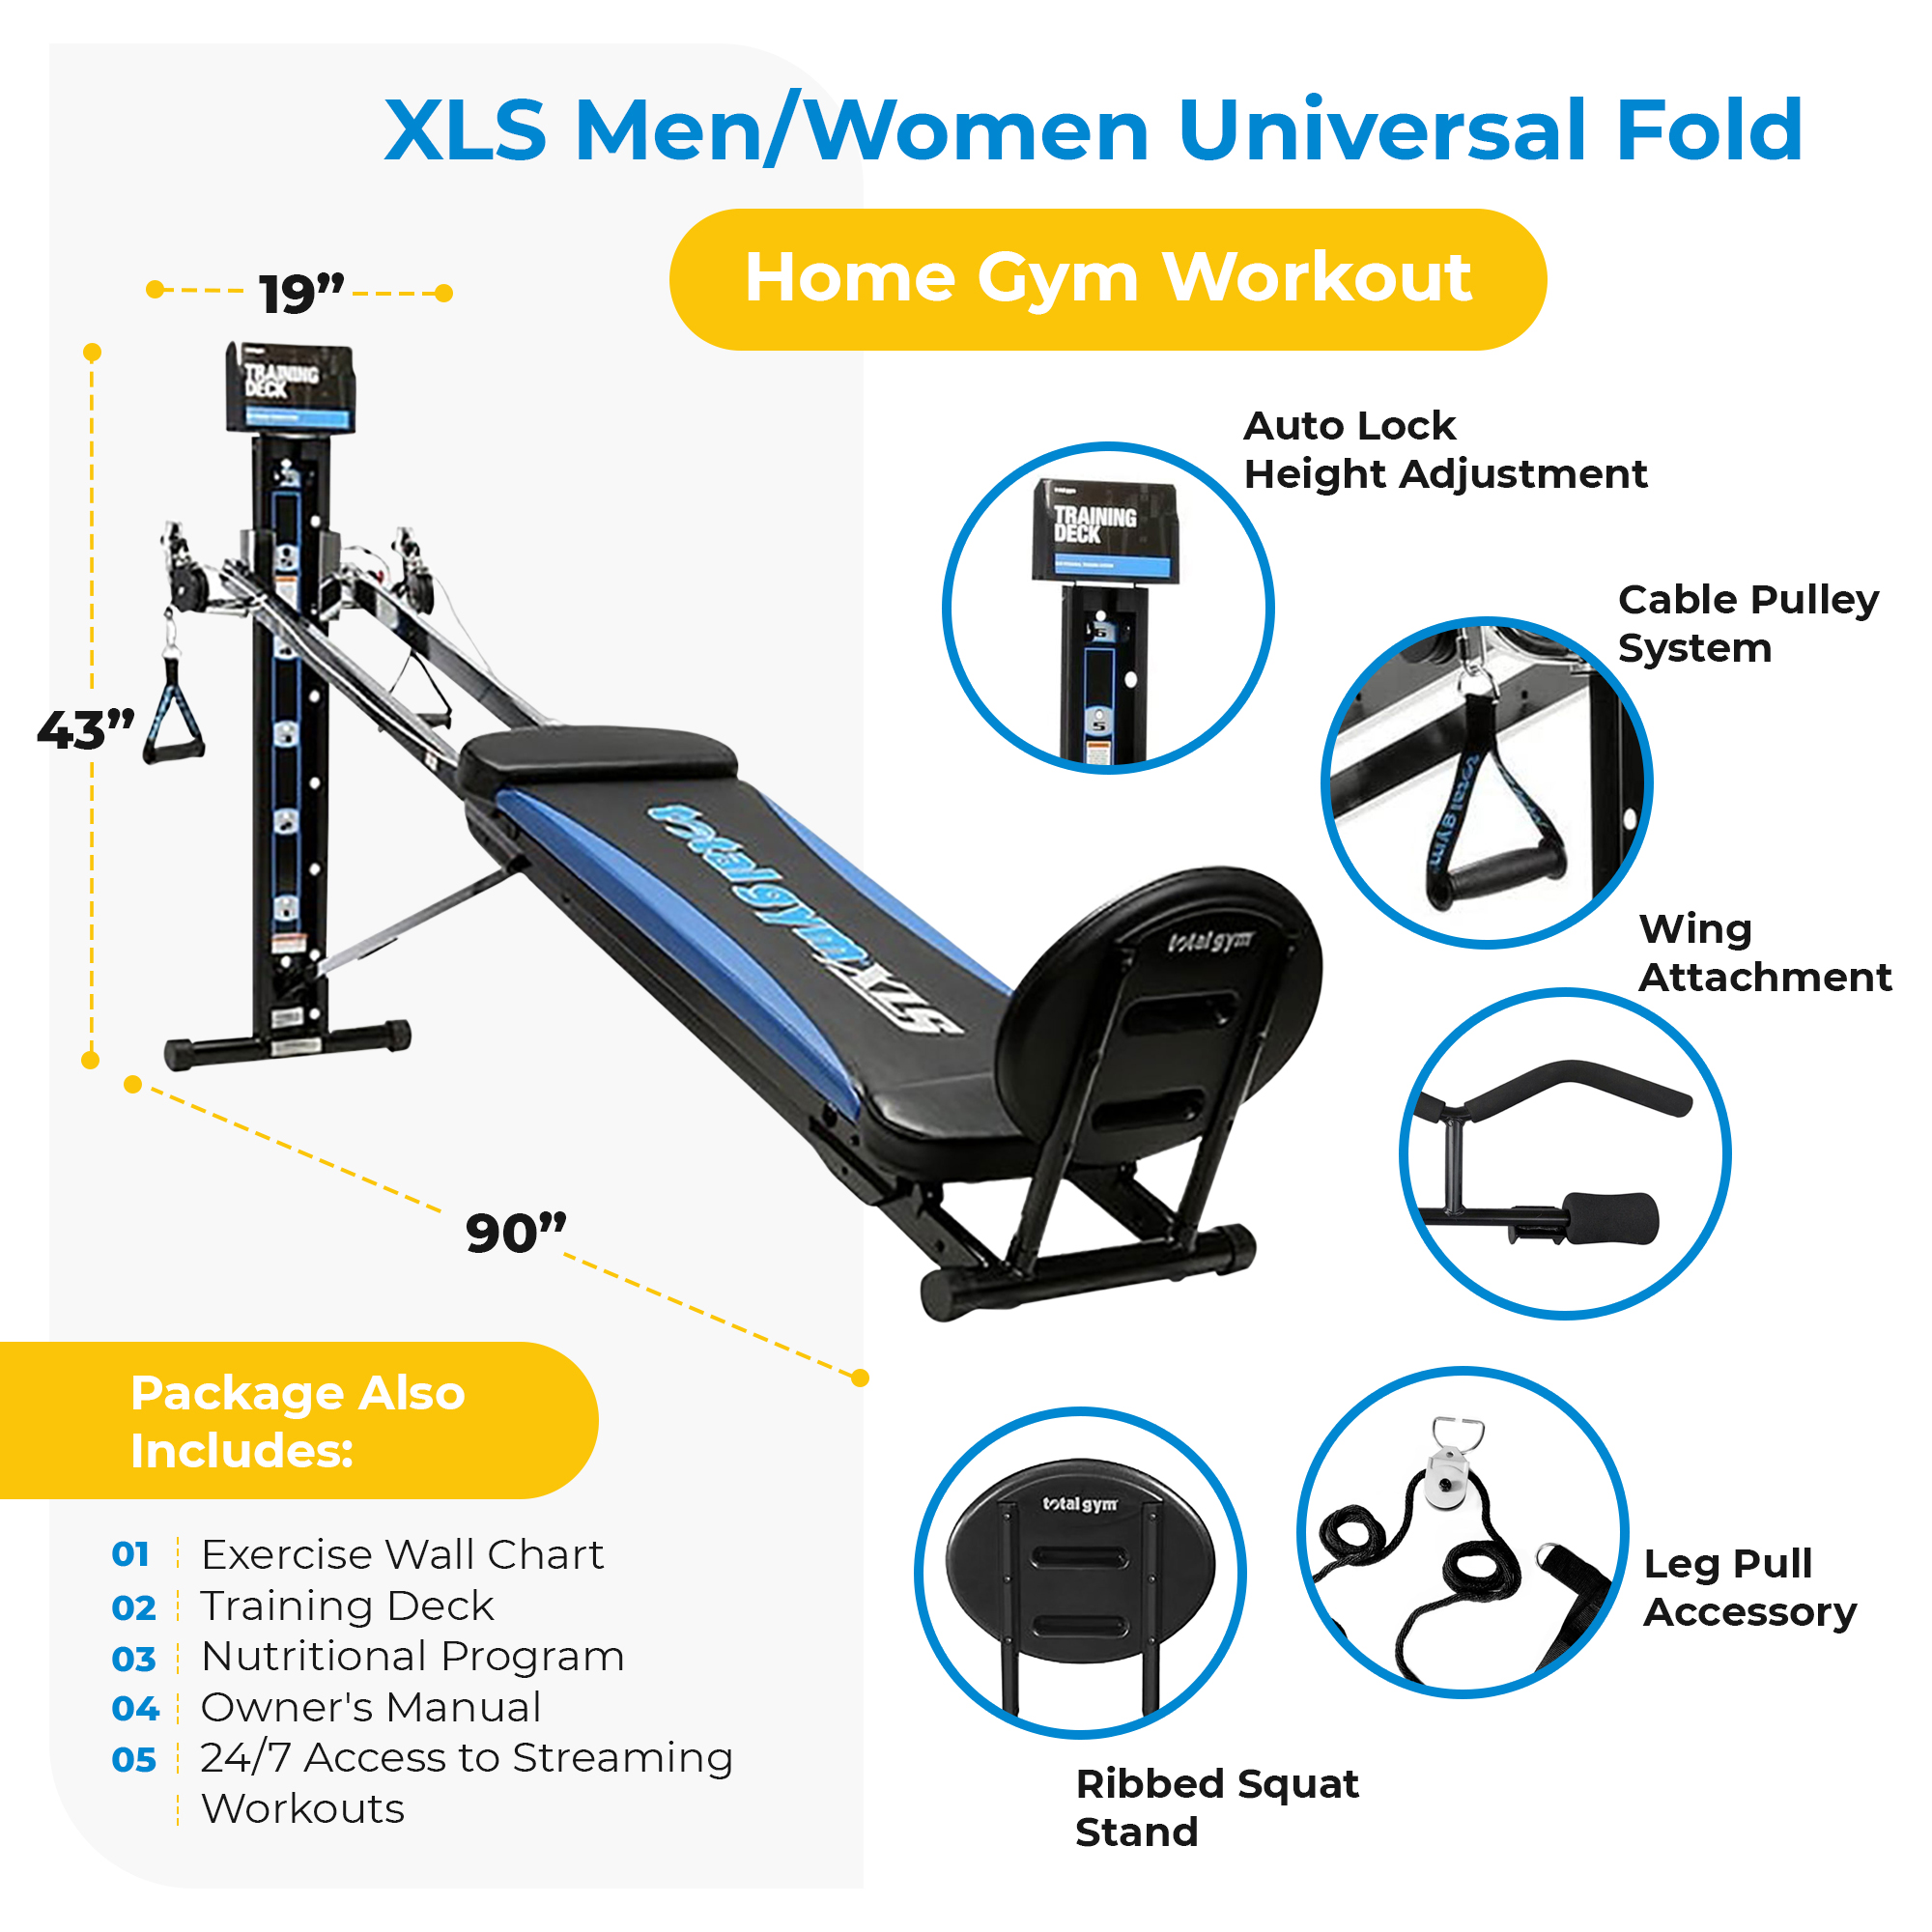 Total Gym XLS Men/Women Universal Fold Home Gym Workout Machine Plus Accessories - image 3 of 11